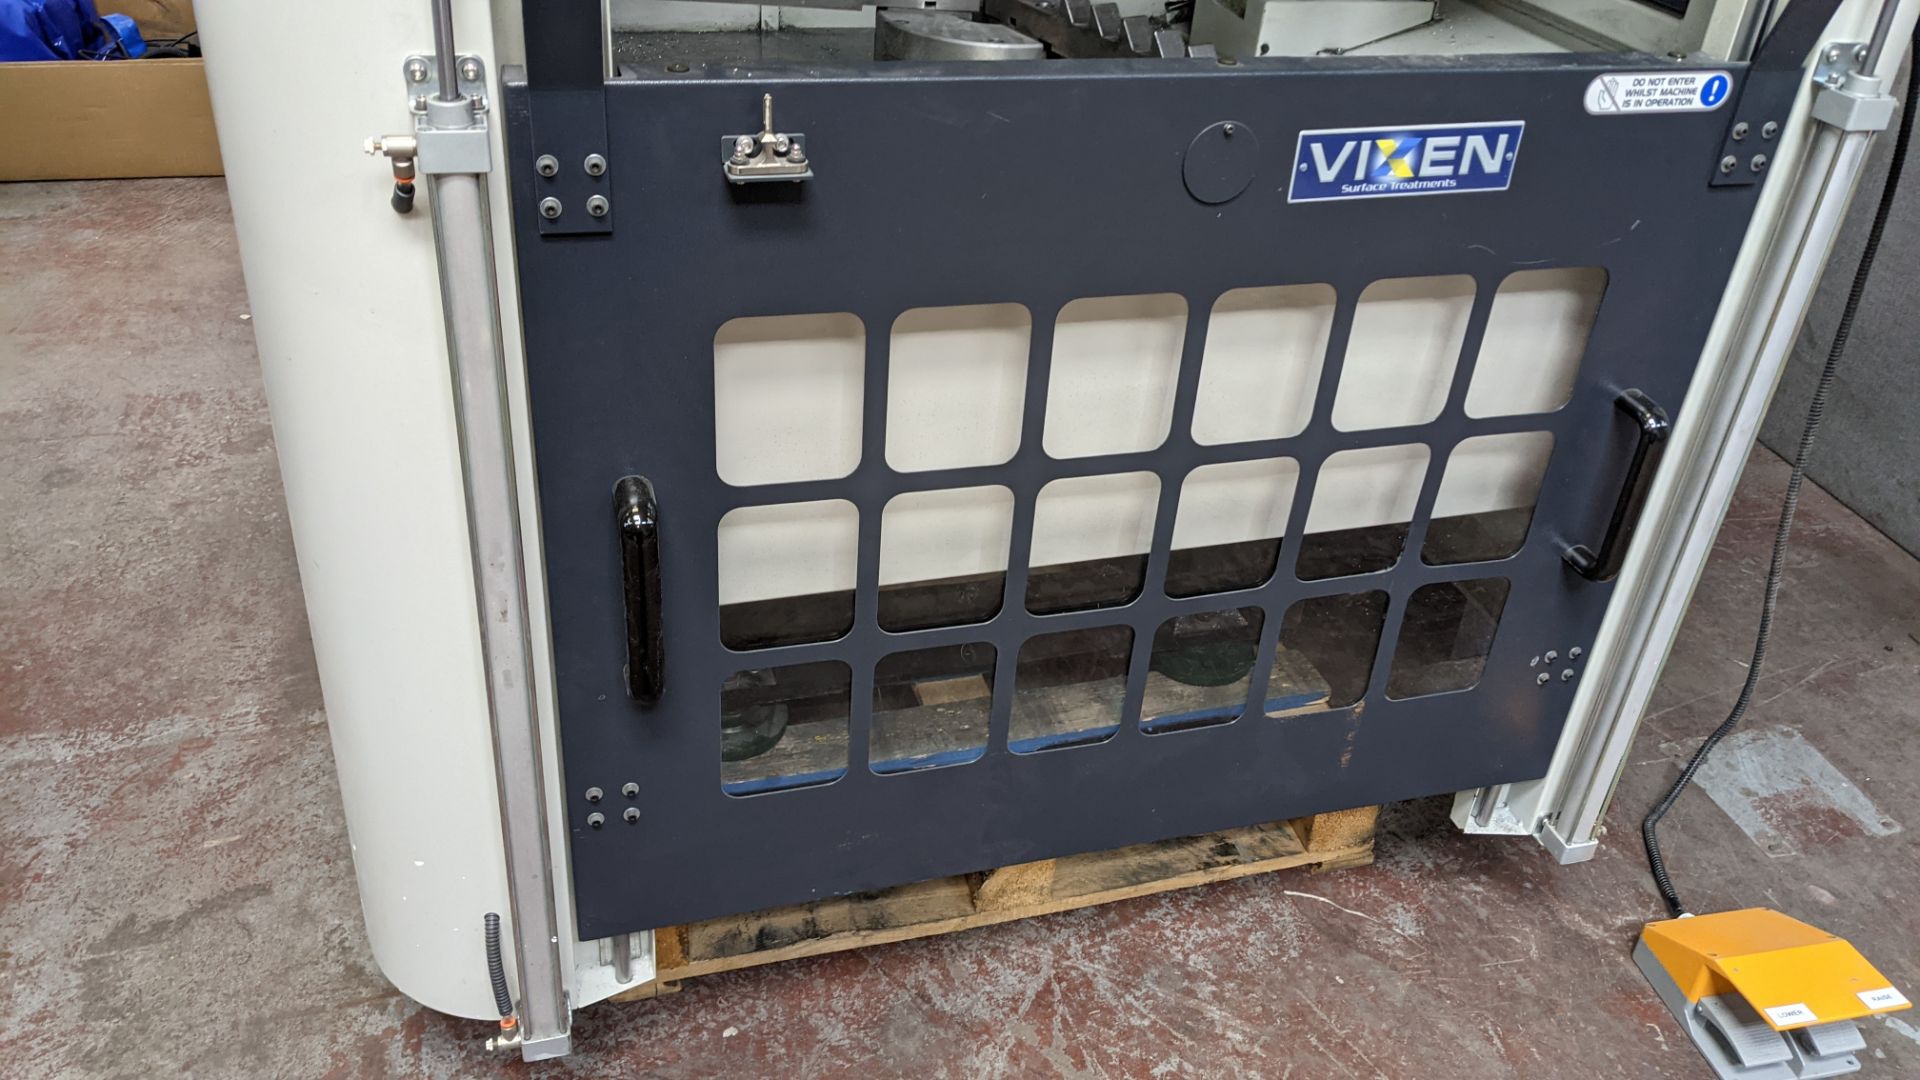 2019 Vixen WHL-35 vertical wheel lathe including all ancillaries as pictured. Serial number 190518/ - Image 11 of 27